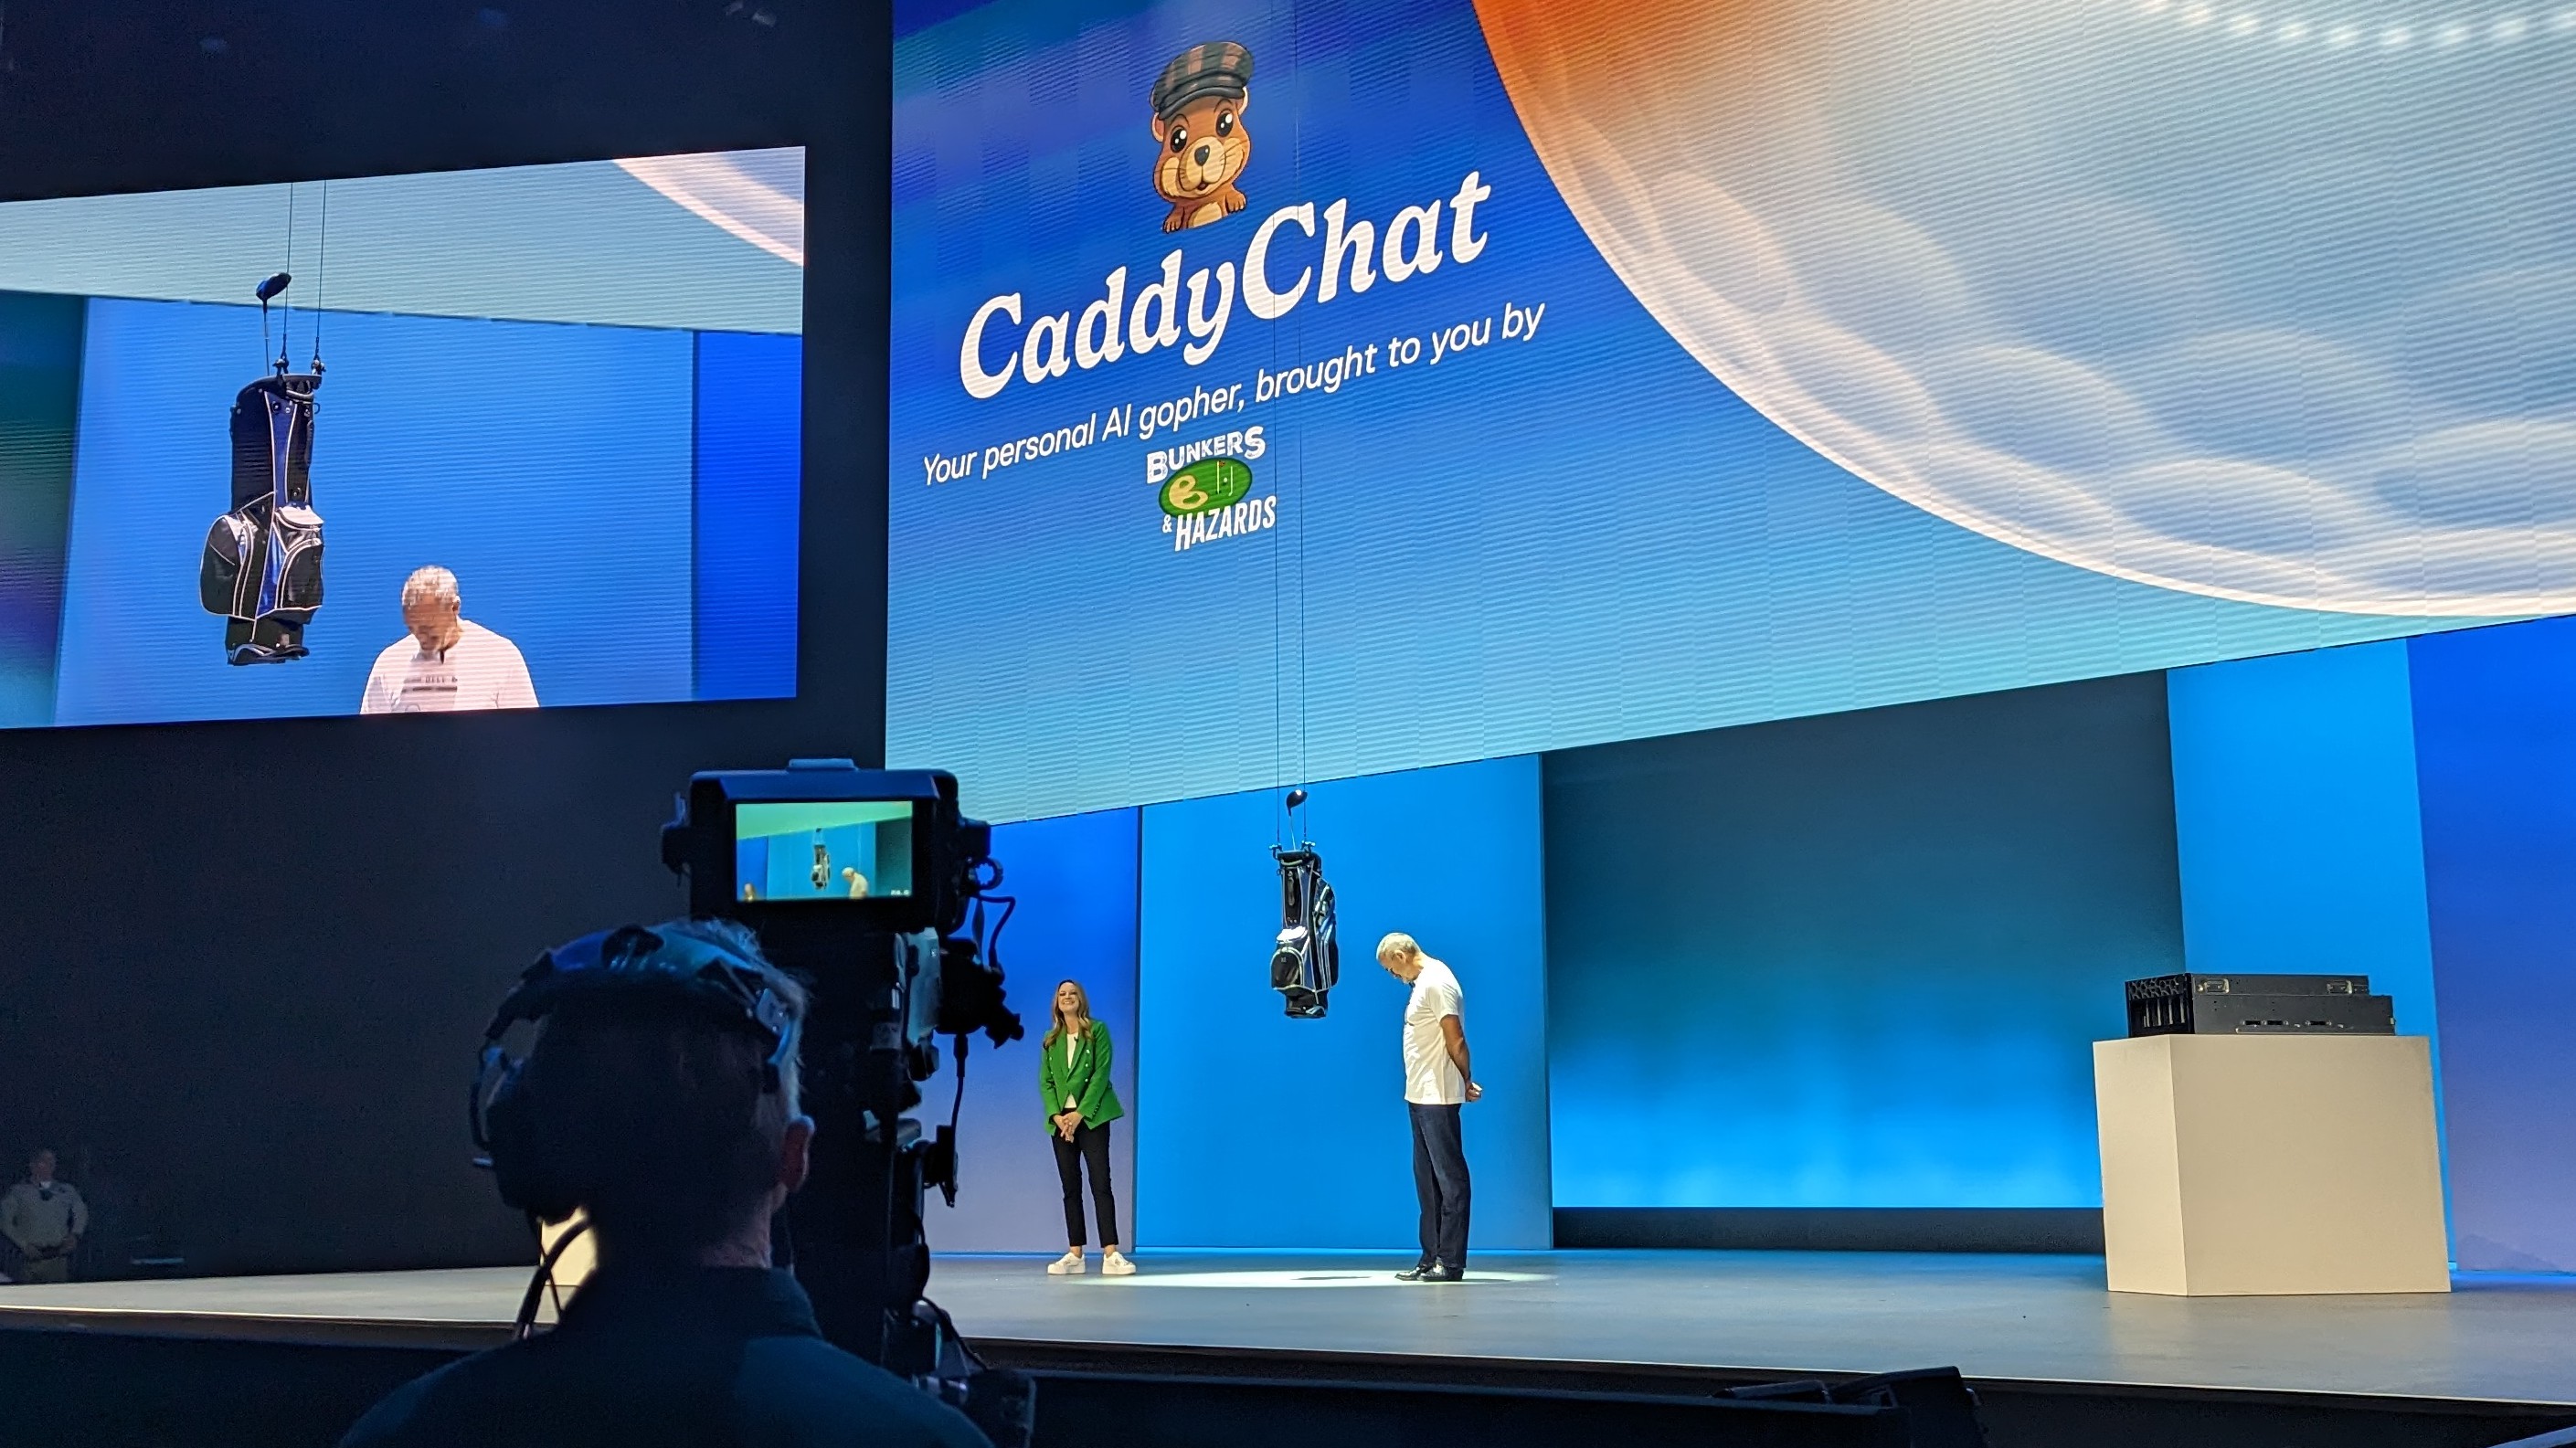 Co-COO Jeff Clarke and chief digital officer and CIO Jen Felch on stage, with a golf bag containing clubs being lowered onto stage via wires and a stylized logo on a large screen behind them showing a chipmunk the word 'CaddyChat'.